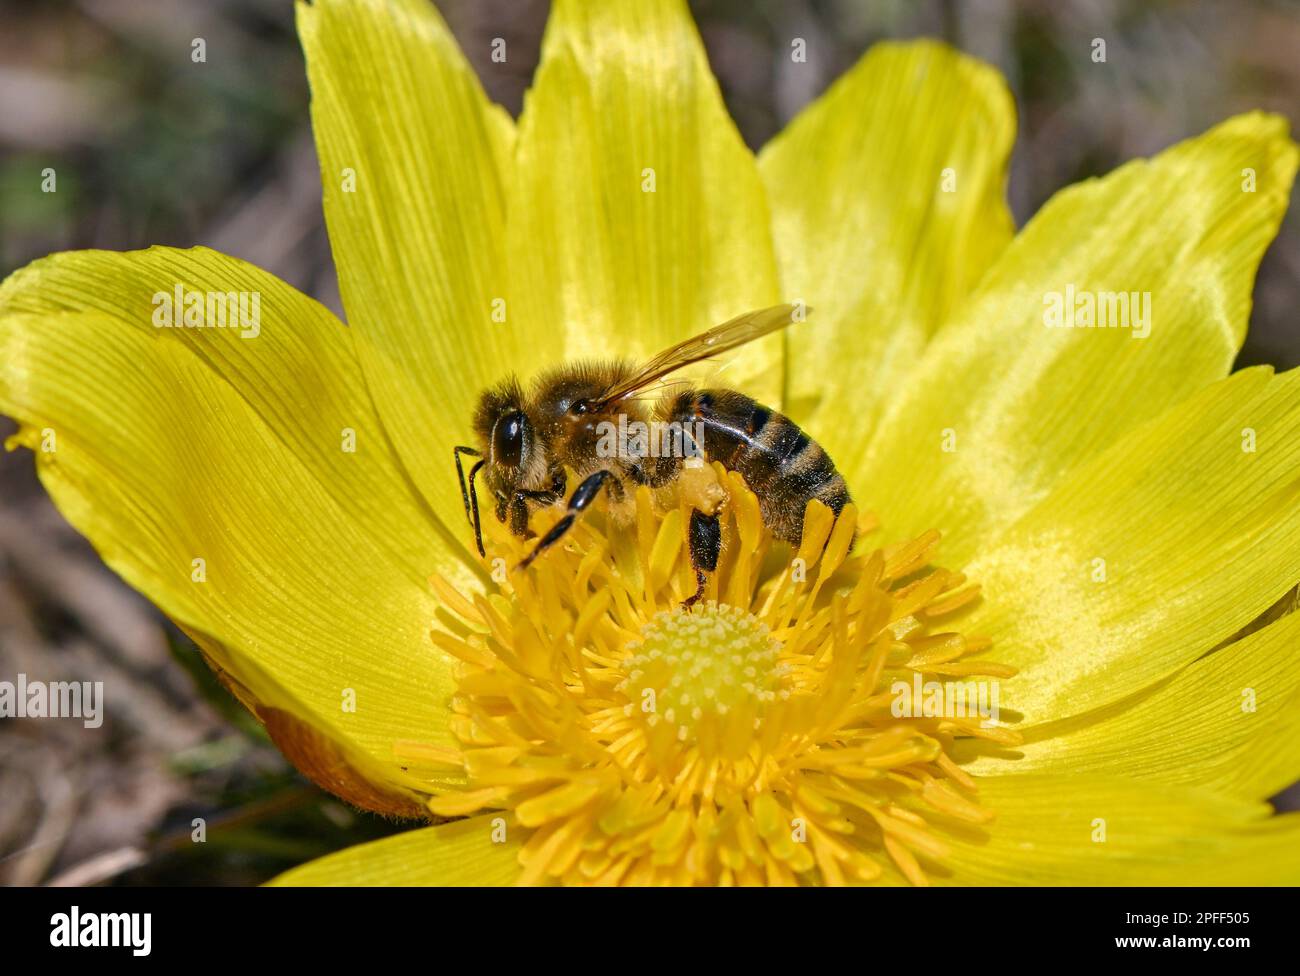 16 March 2023, Brandenburg, Lebus: A bee searches for nectar and pollen on an Adonis rose flower on the Oder slope in the district of Märkisch-Oderland. The mild temperatures and warm sunshine of the last few days have led to the first Adonis anemones blooming. The area between Lebus on the Oder and Mallnow on the Oderbruch rim in East Brandenburg is one of the largest contiguous Adonis rose areas in Europe. In Brandenburg, these strictly protected species only occur on the Pontic slopes north of Frankfurt (Oder). For the poisonous flowers, the area was declared a Trockerasen nature reserve in Stock Photo